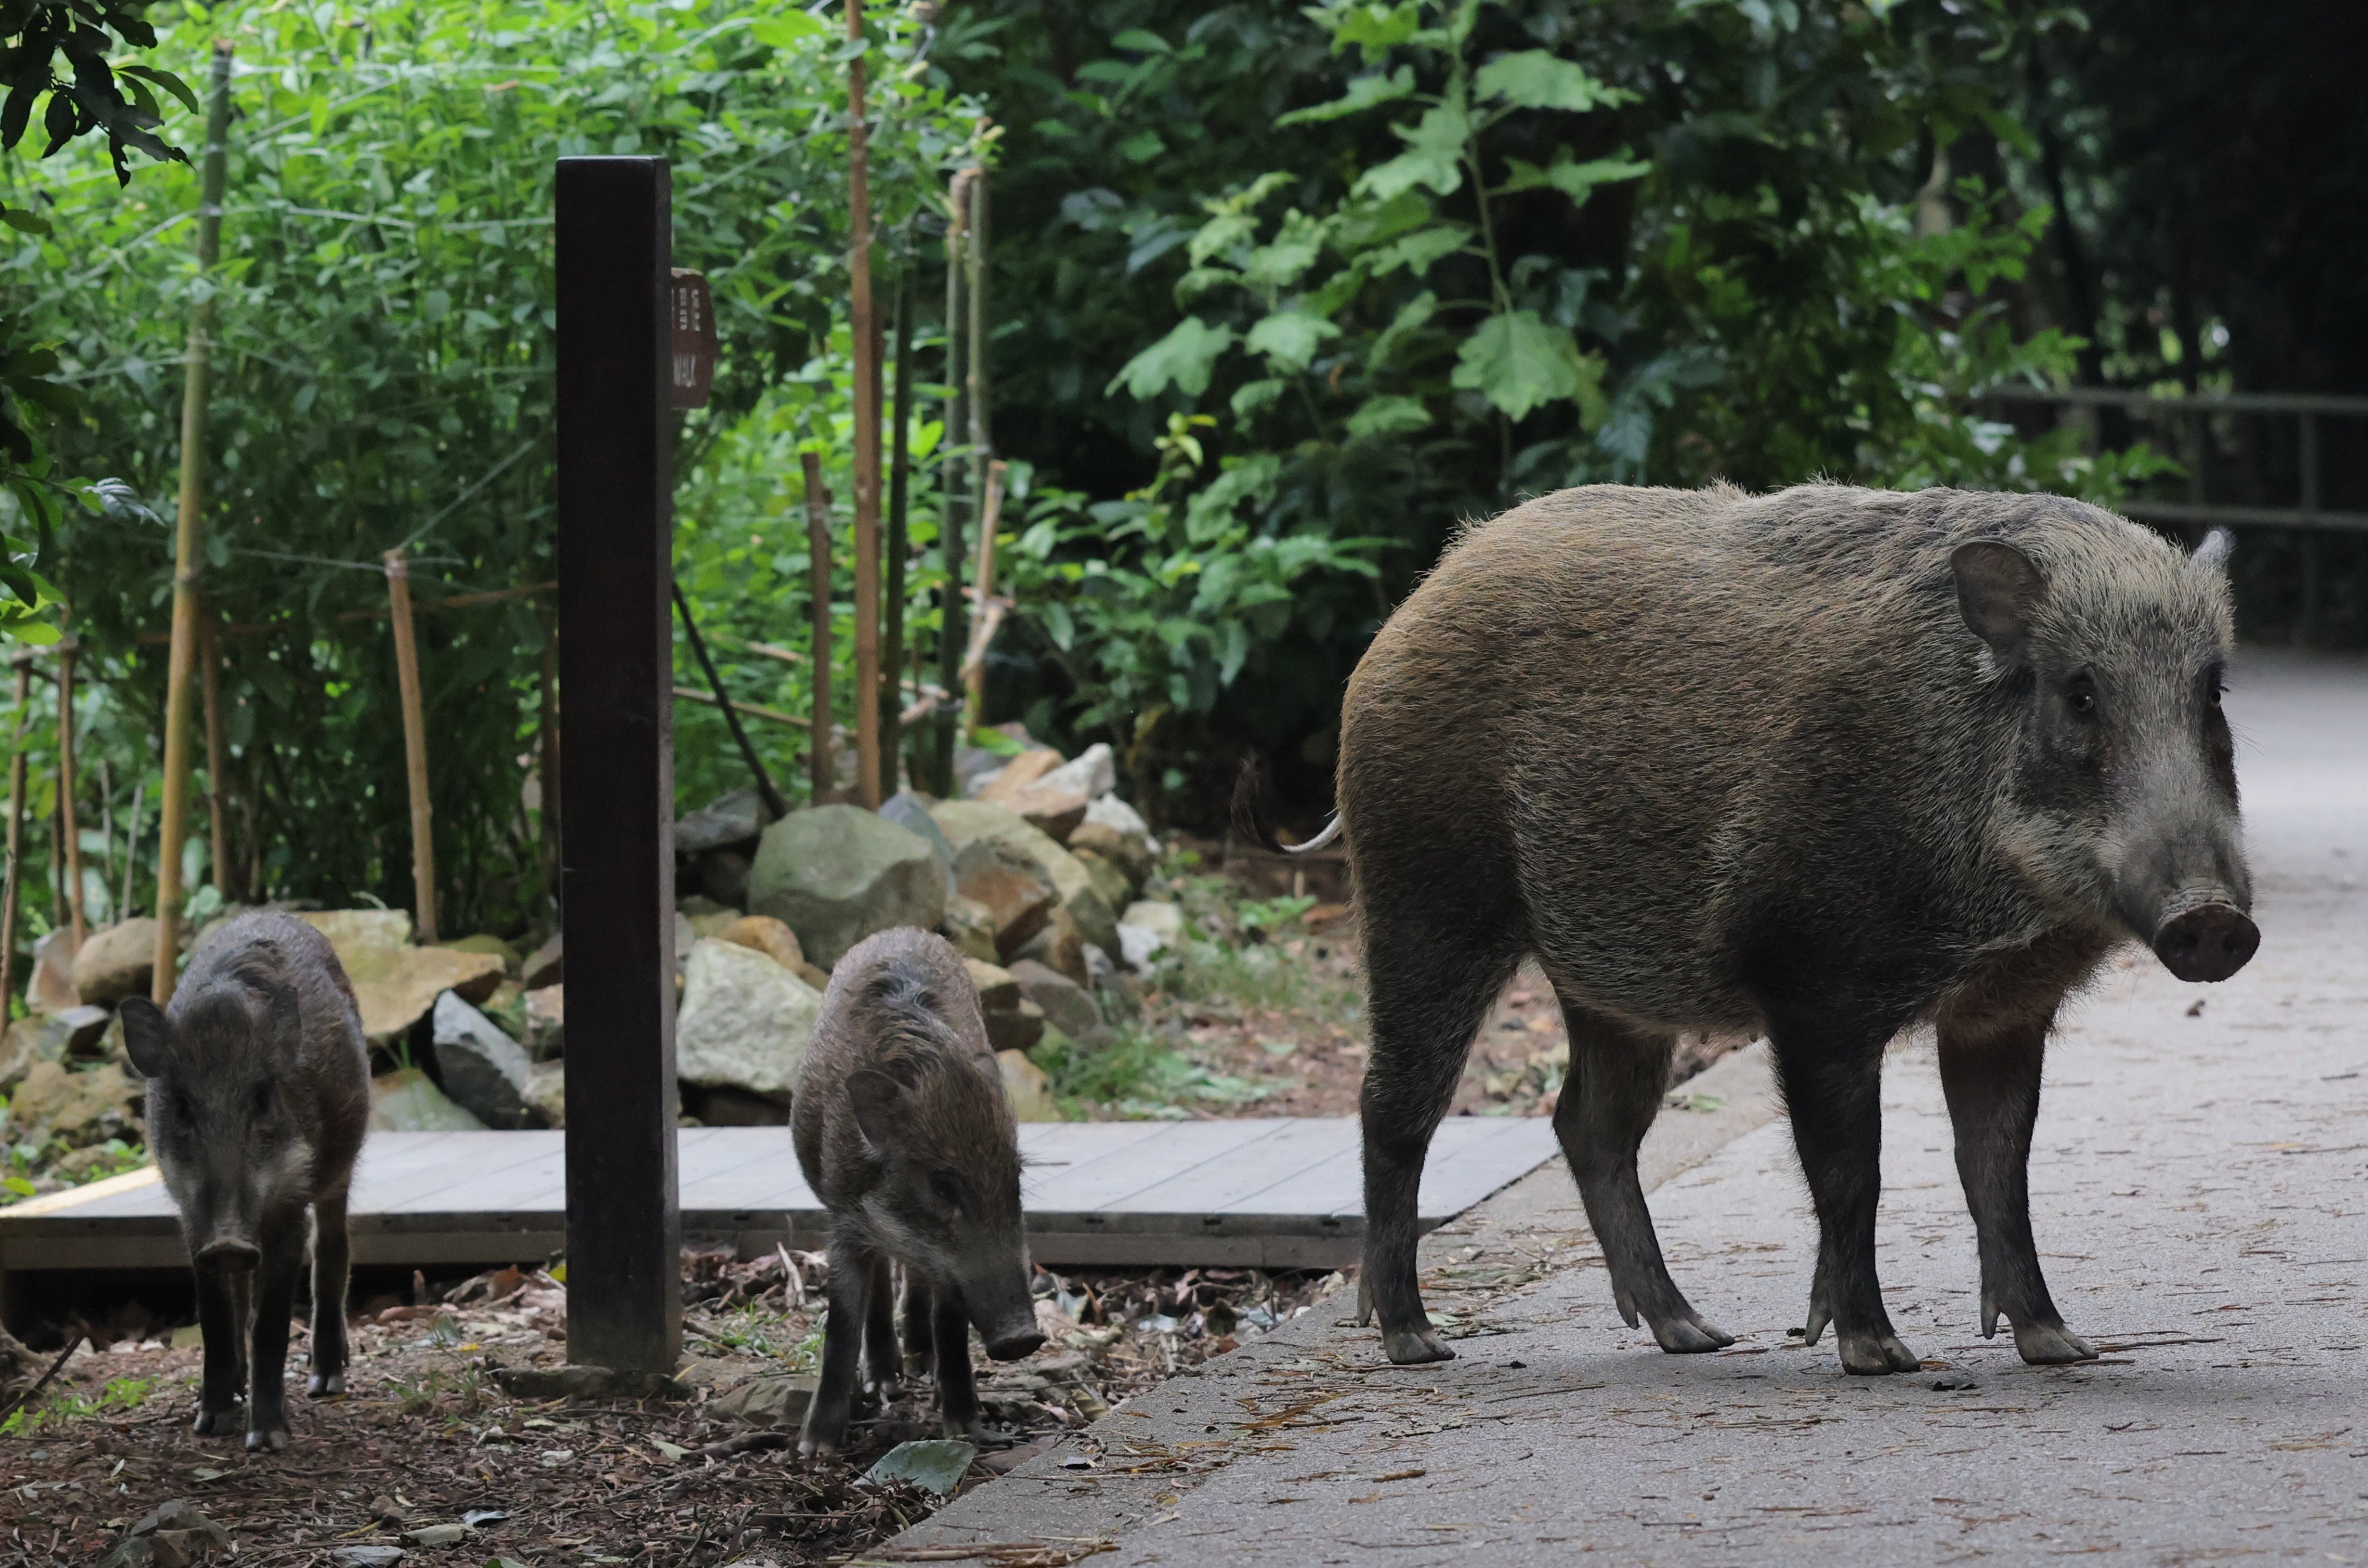 The city’s wild boars have been the target of a cull by authorities. Photo: Jelly Tse